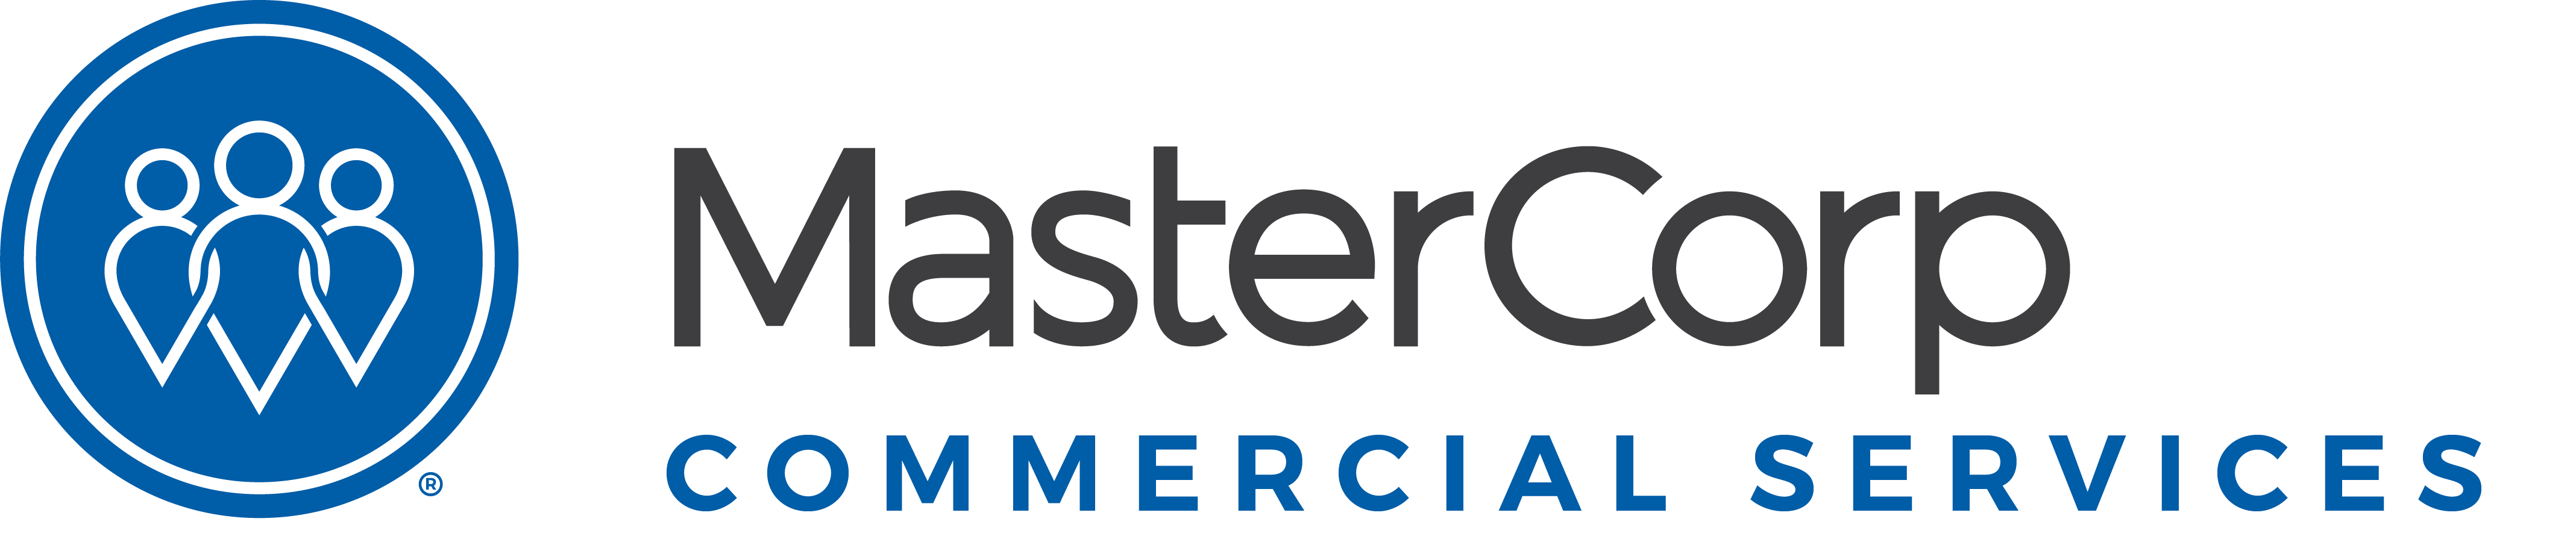 MasterCorp Commercial Services Logo